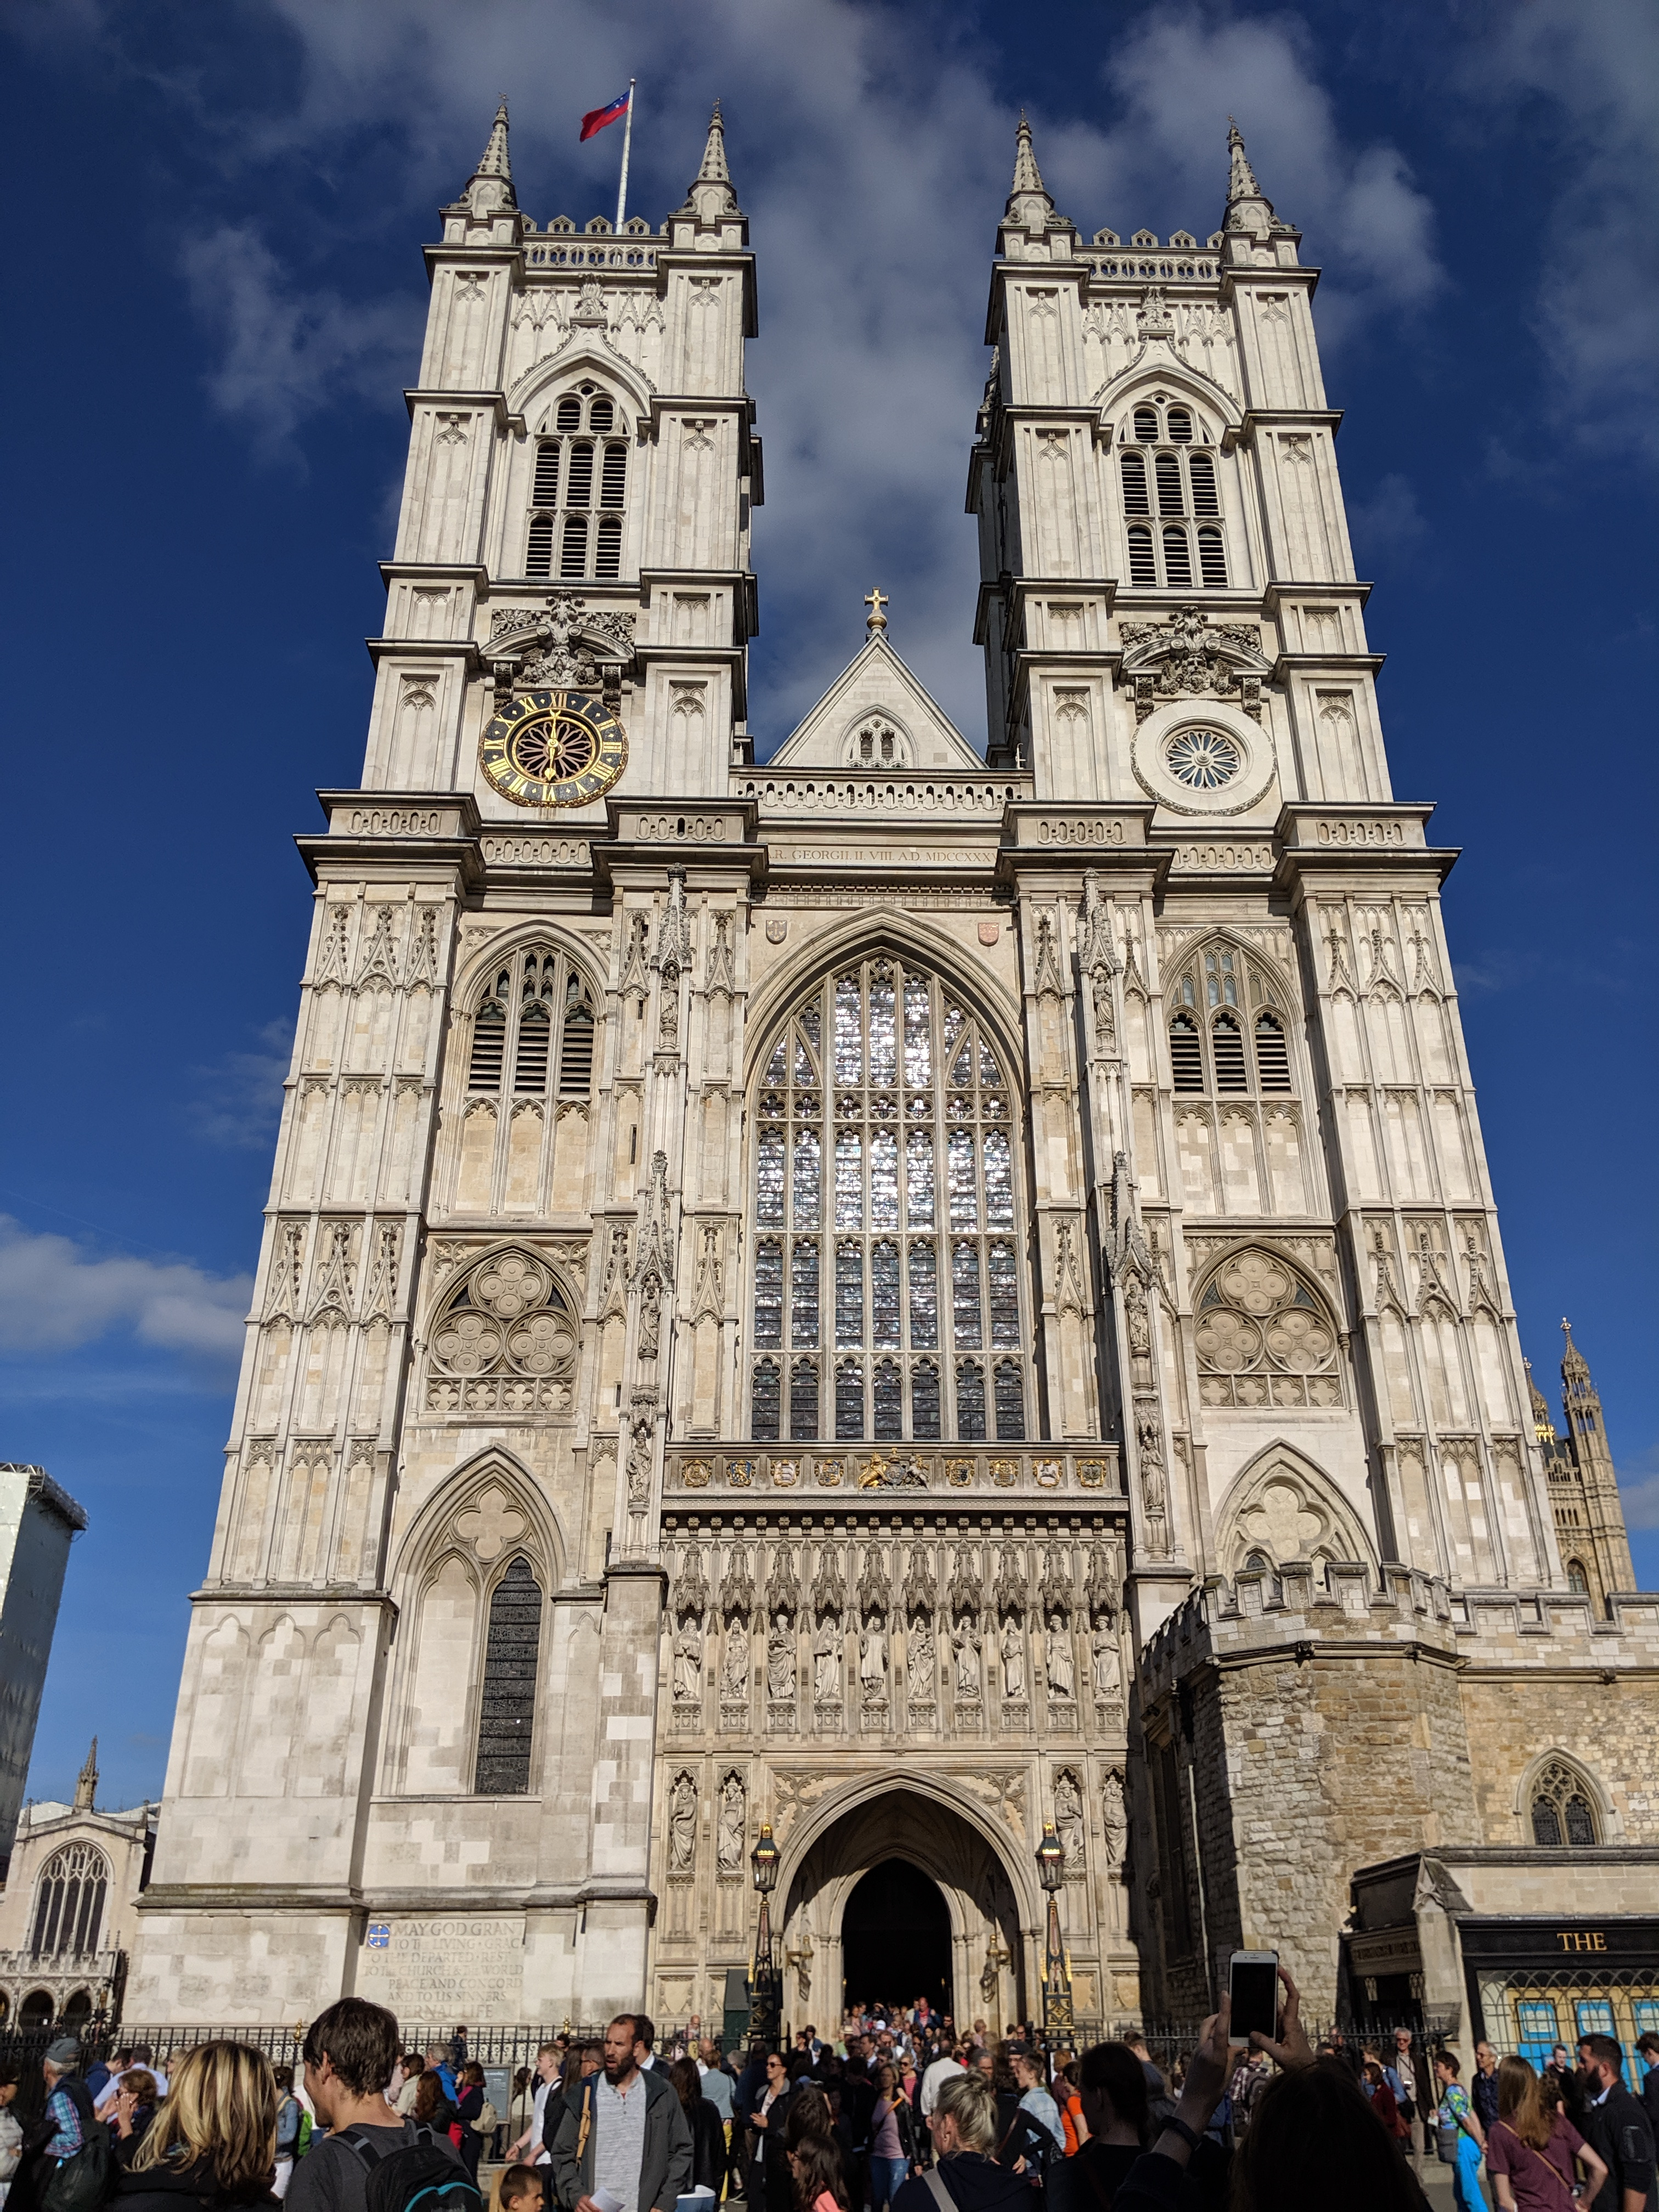 ./images/westminster-abbey.jpg